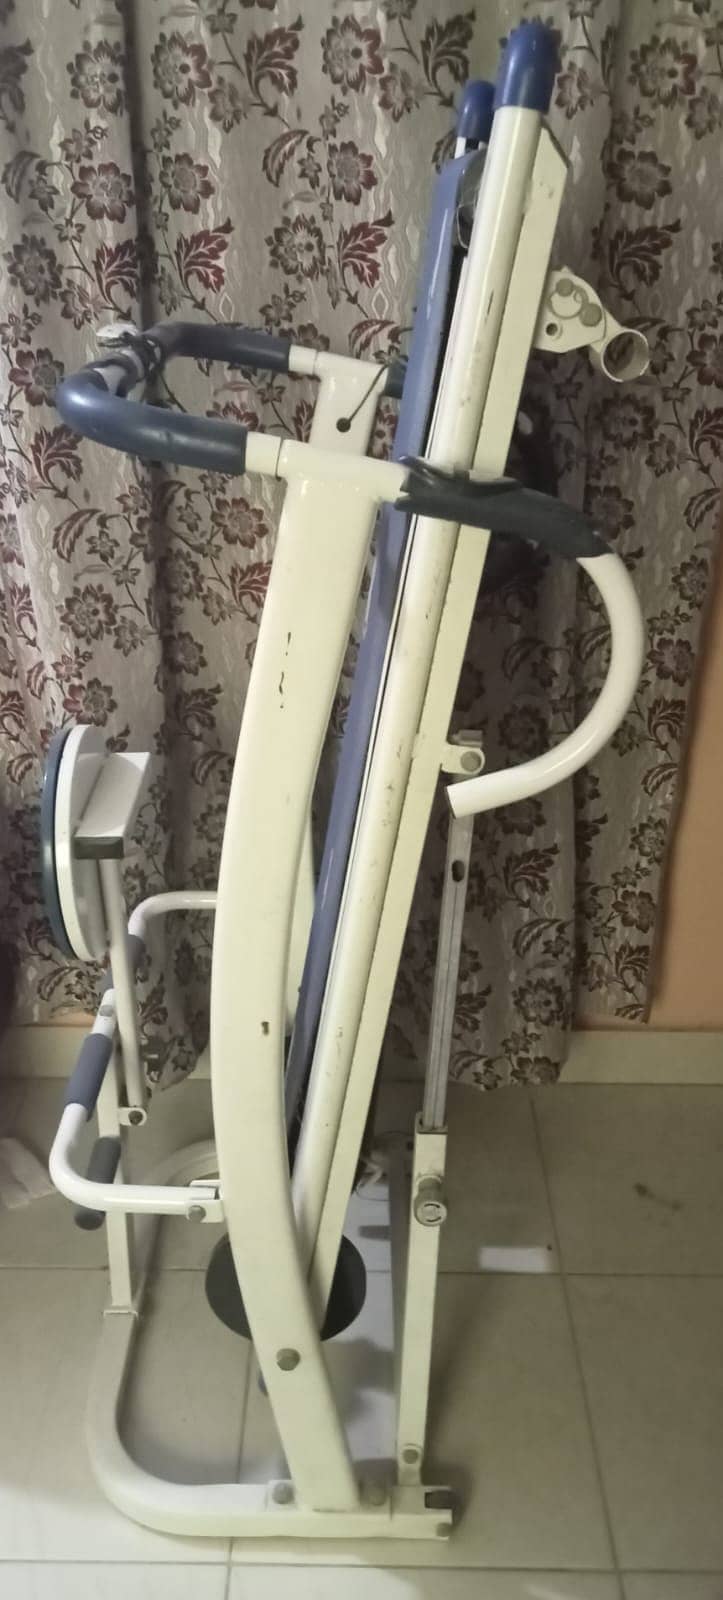 Treadmill for home users (looks like new) 3